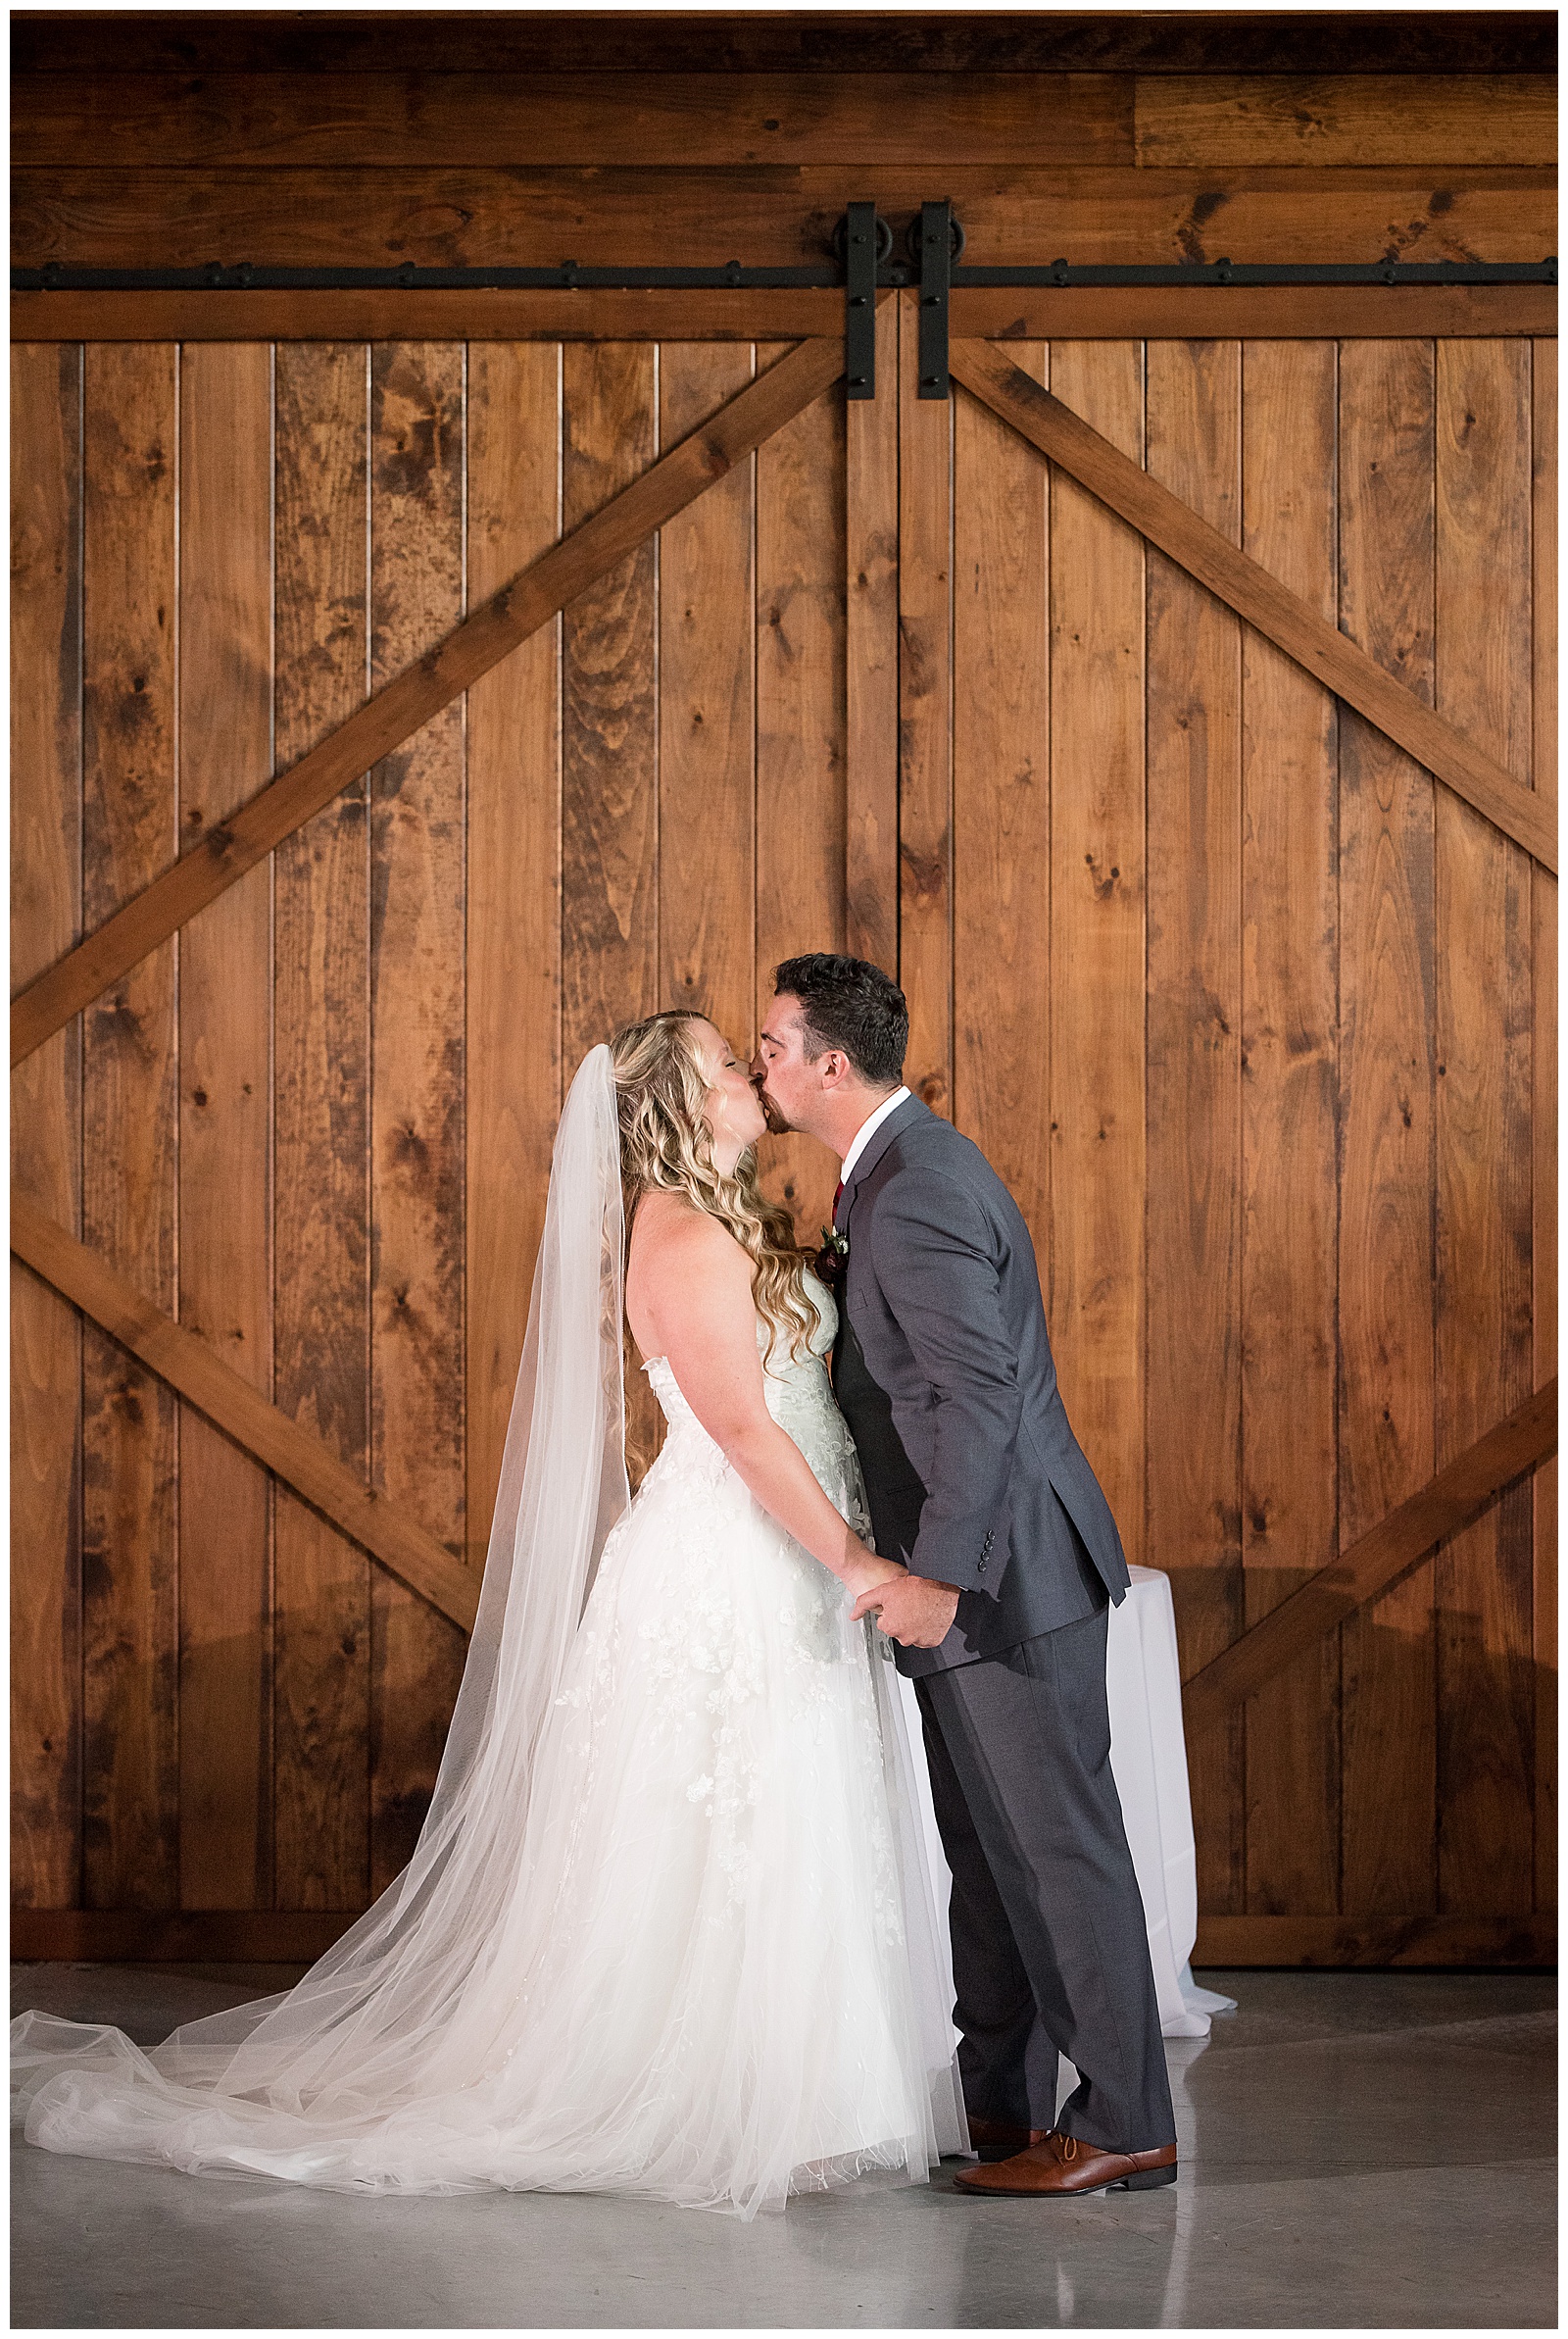 bride and groom share their first kiss as husband and wife during wedding ceremony by wooden barn doors in lancaster pennsylvania